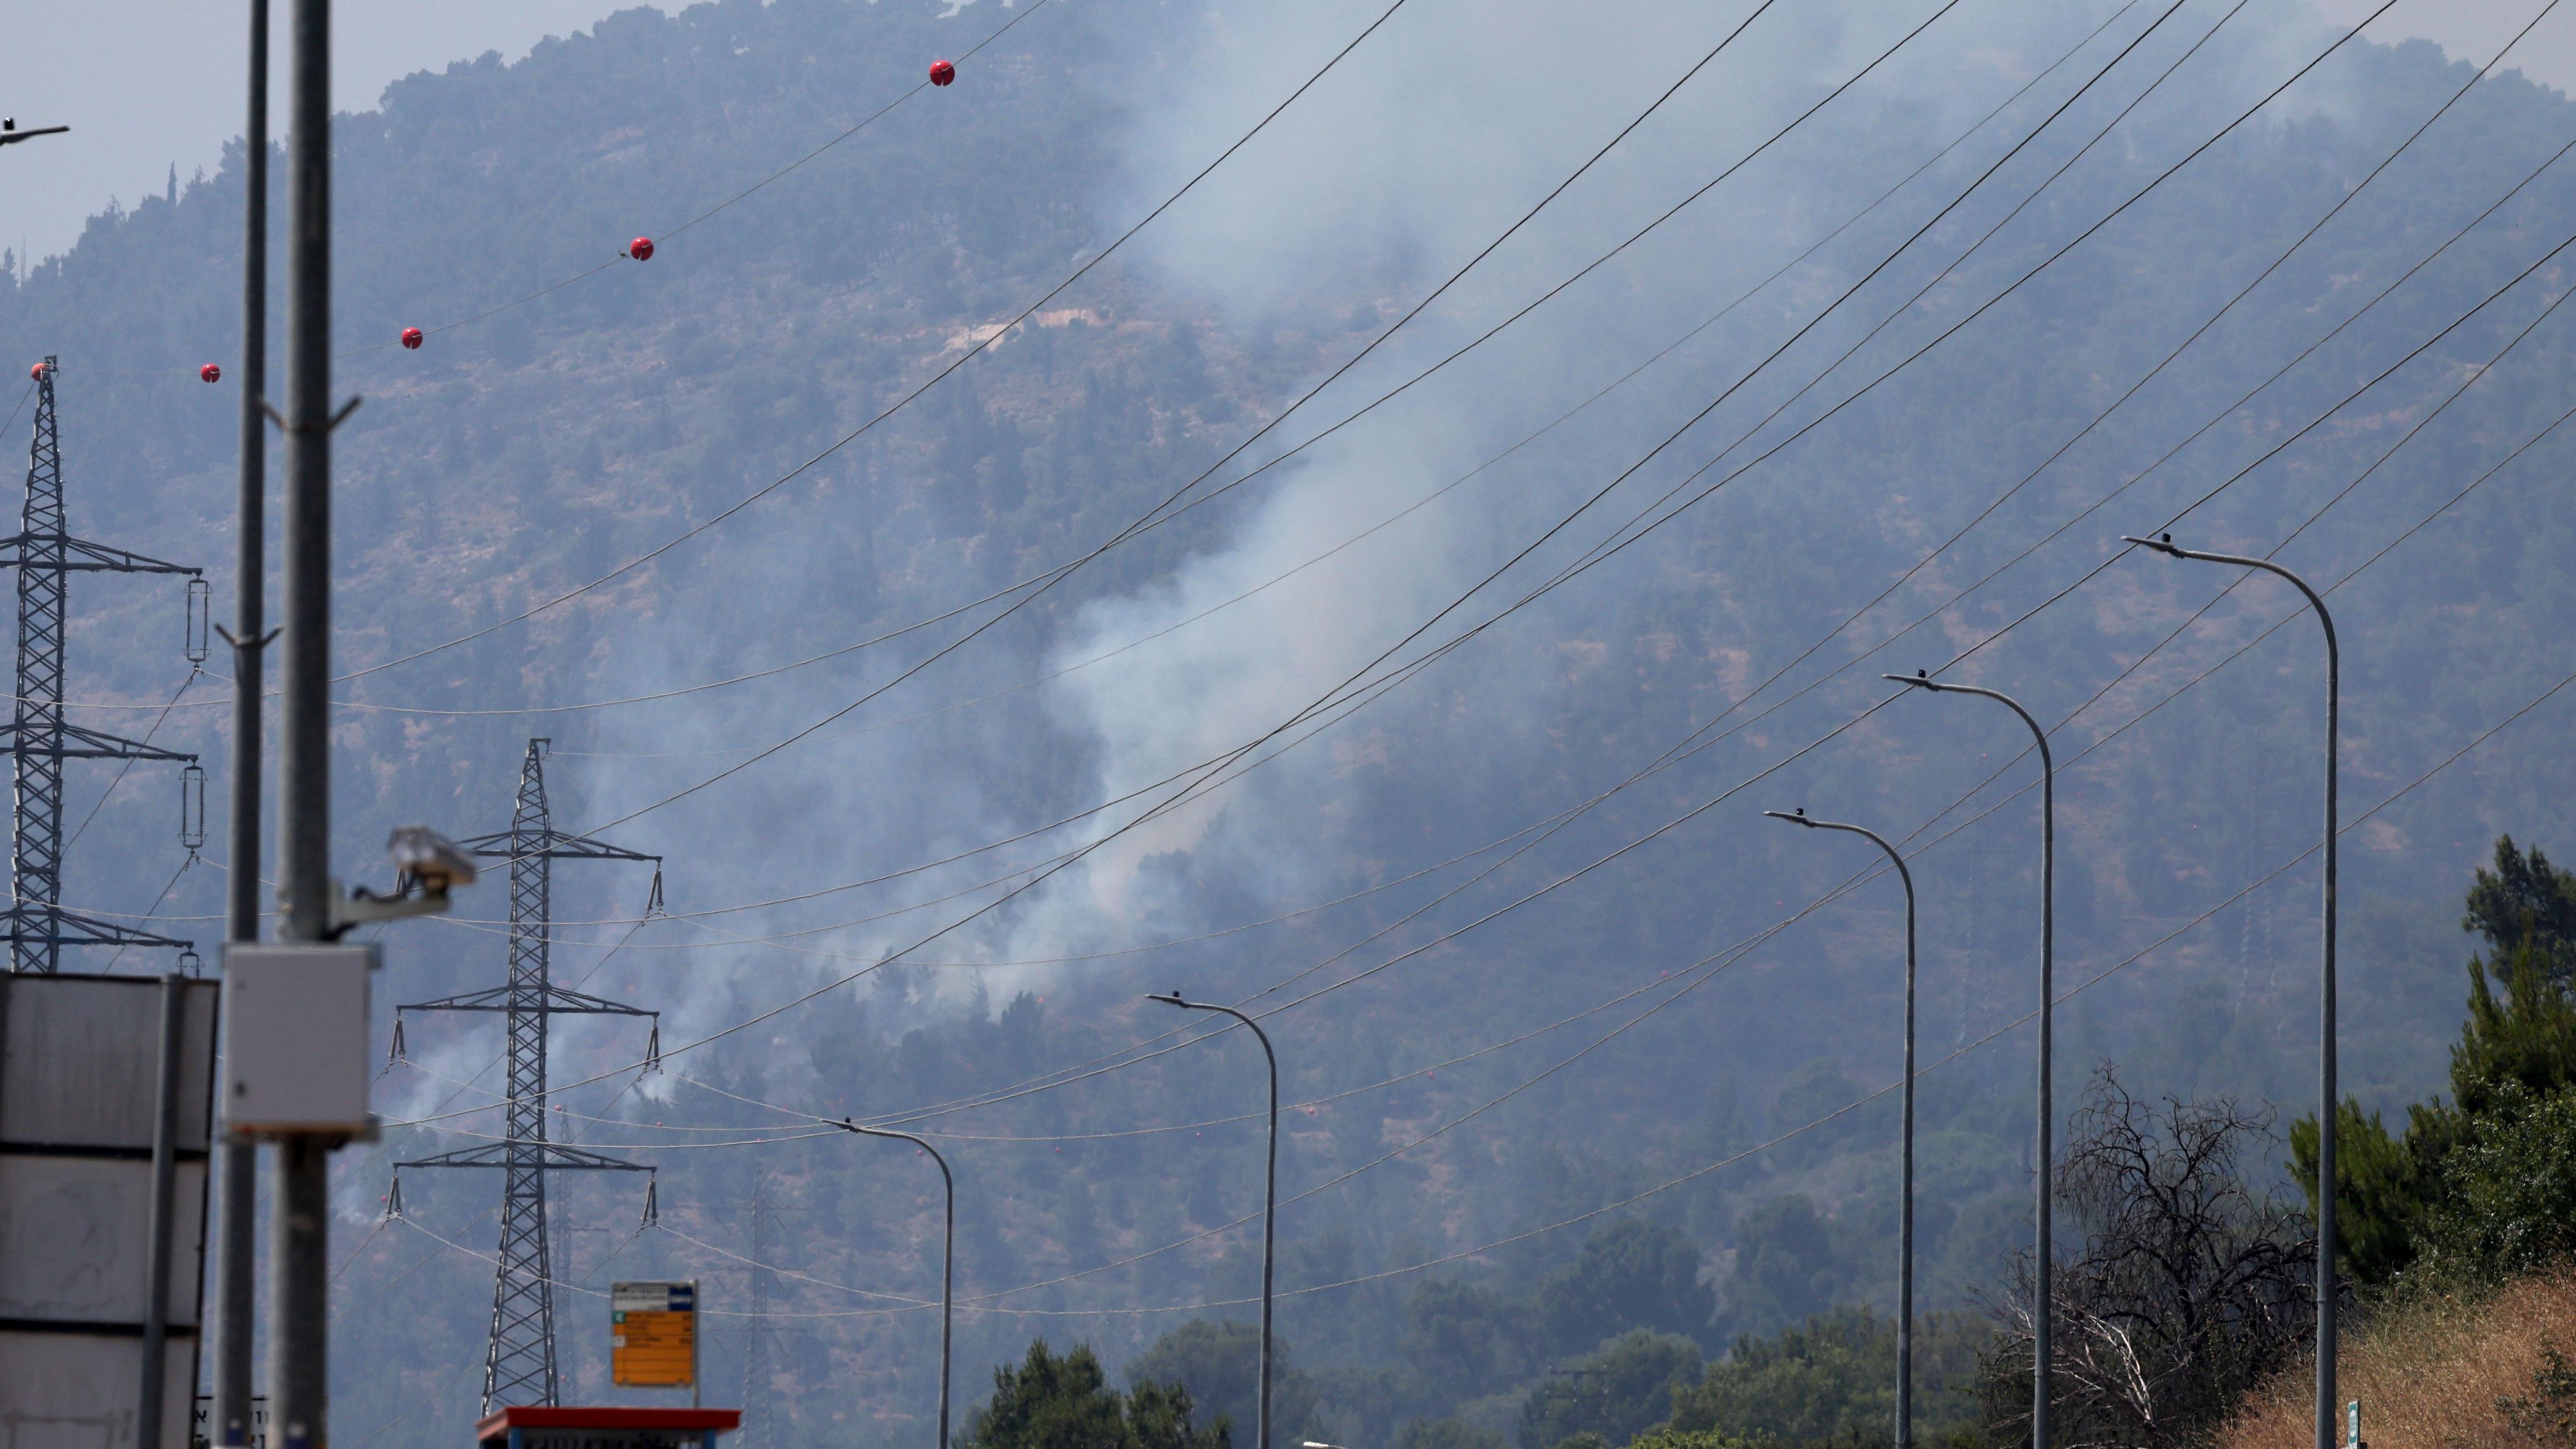 Hezbollah attacks earlier led to fires in some areas of northern Israel.